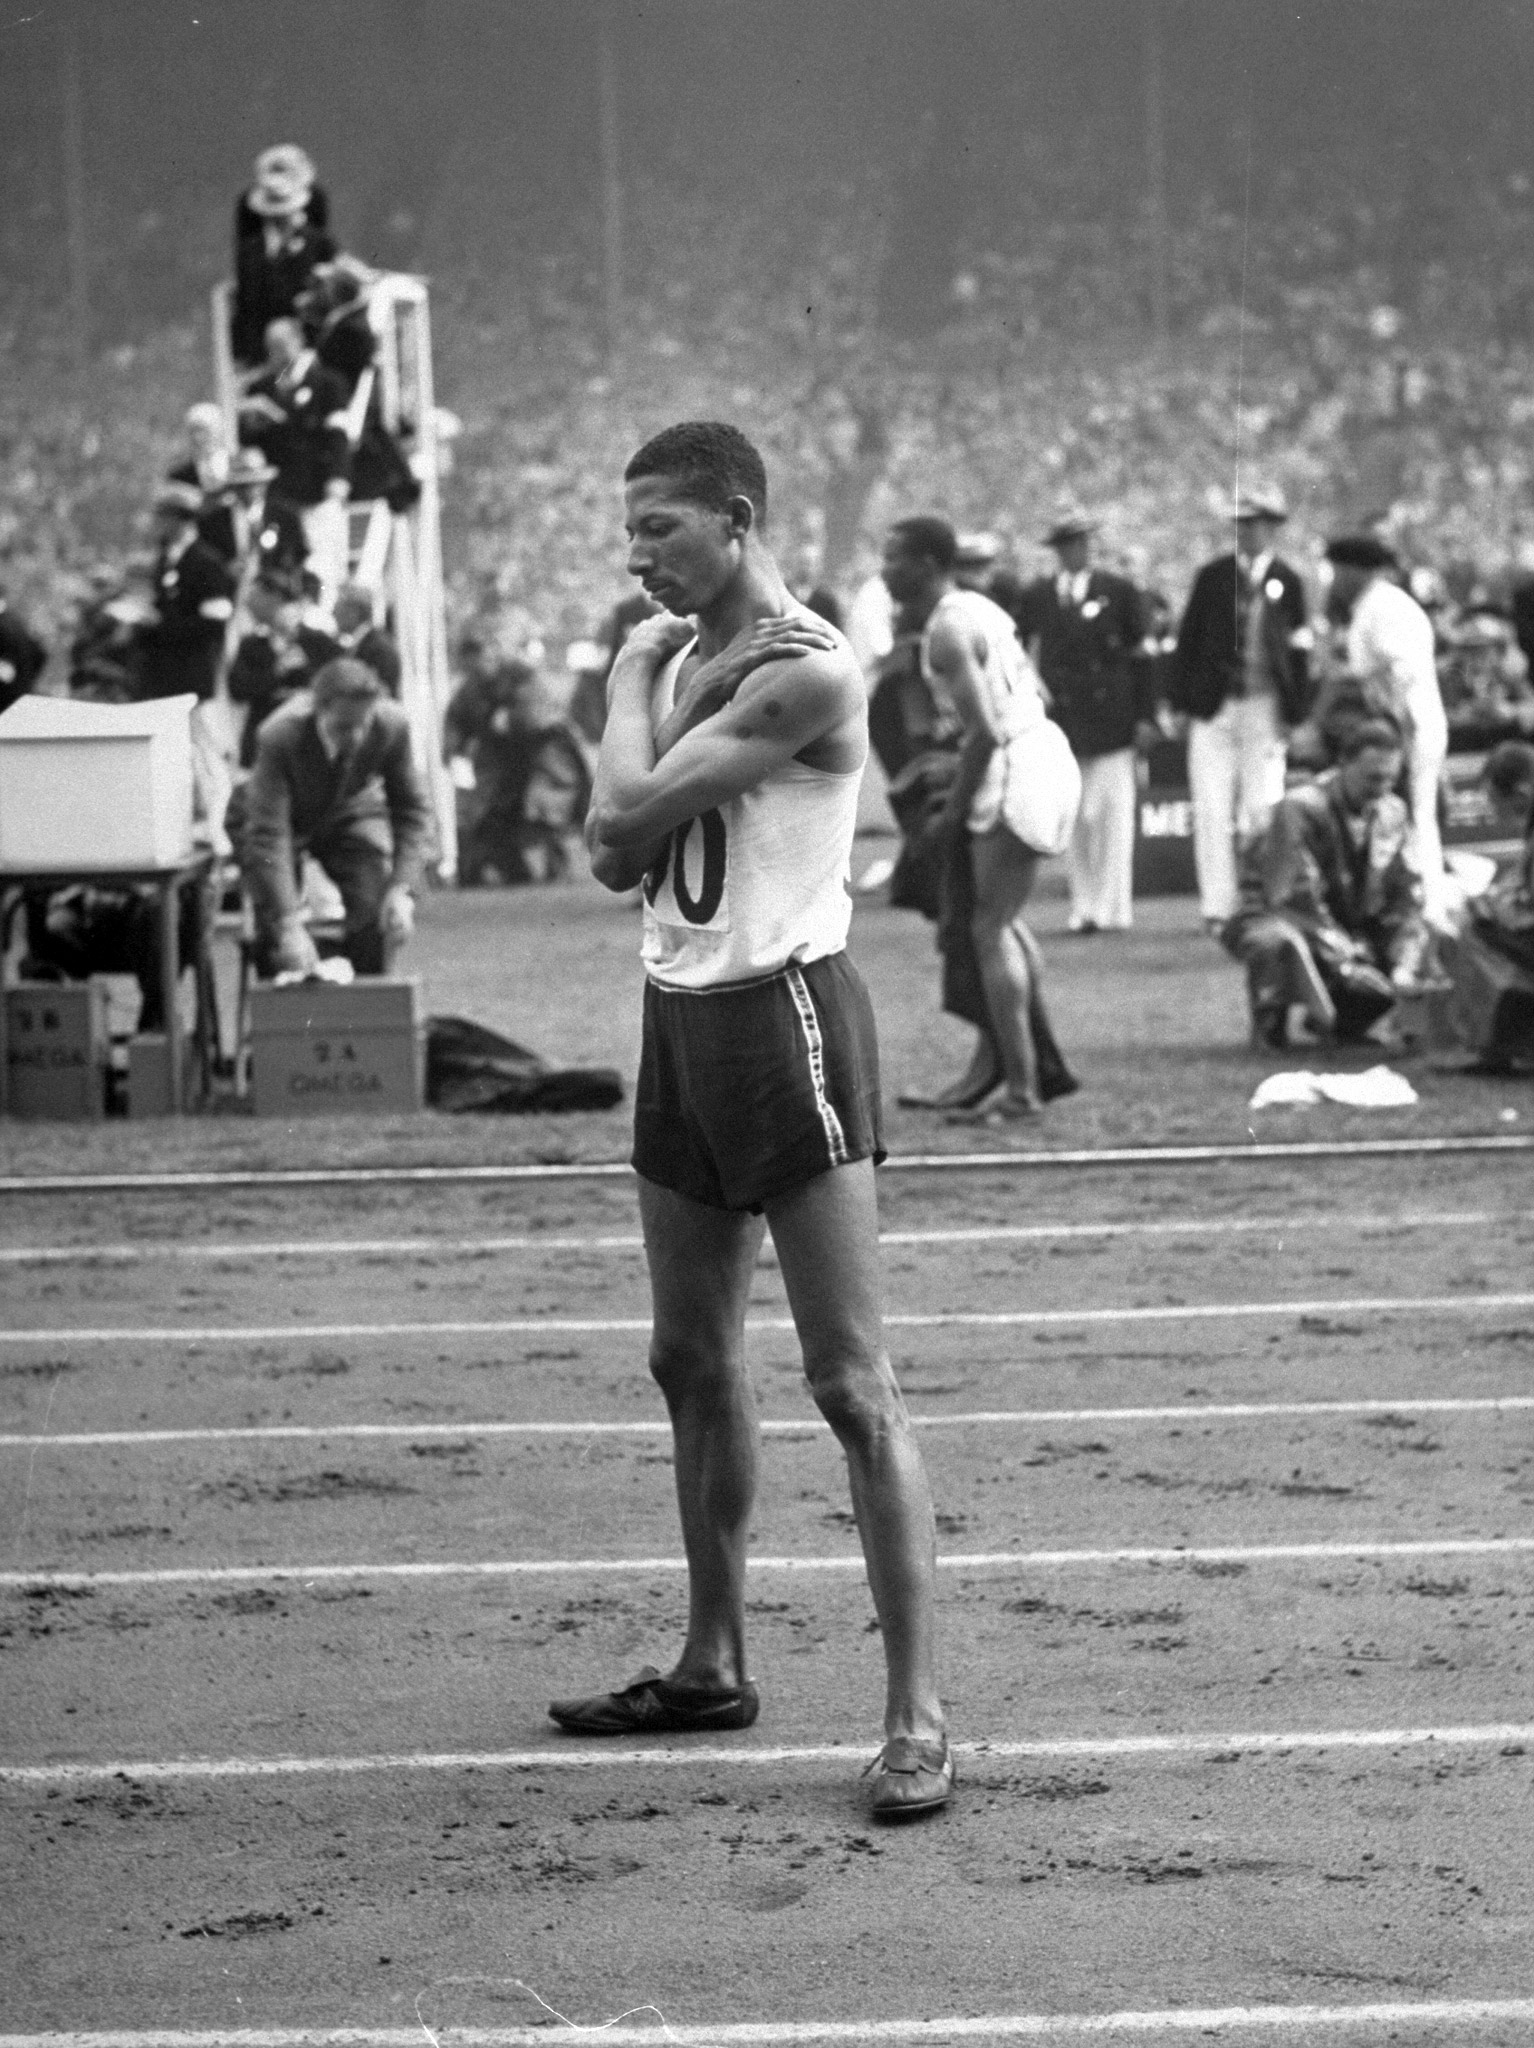 Jamaican athlete Herb McKenley standing on a track at the 1948 summer Olympics in London.